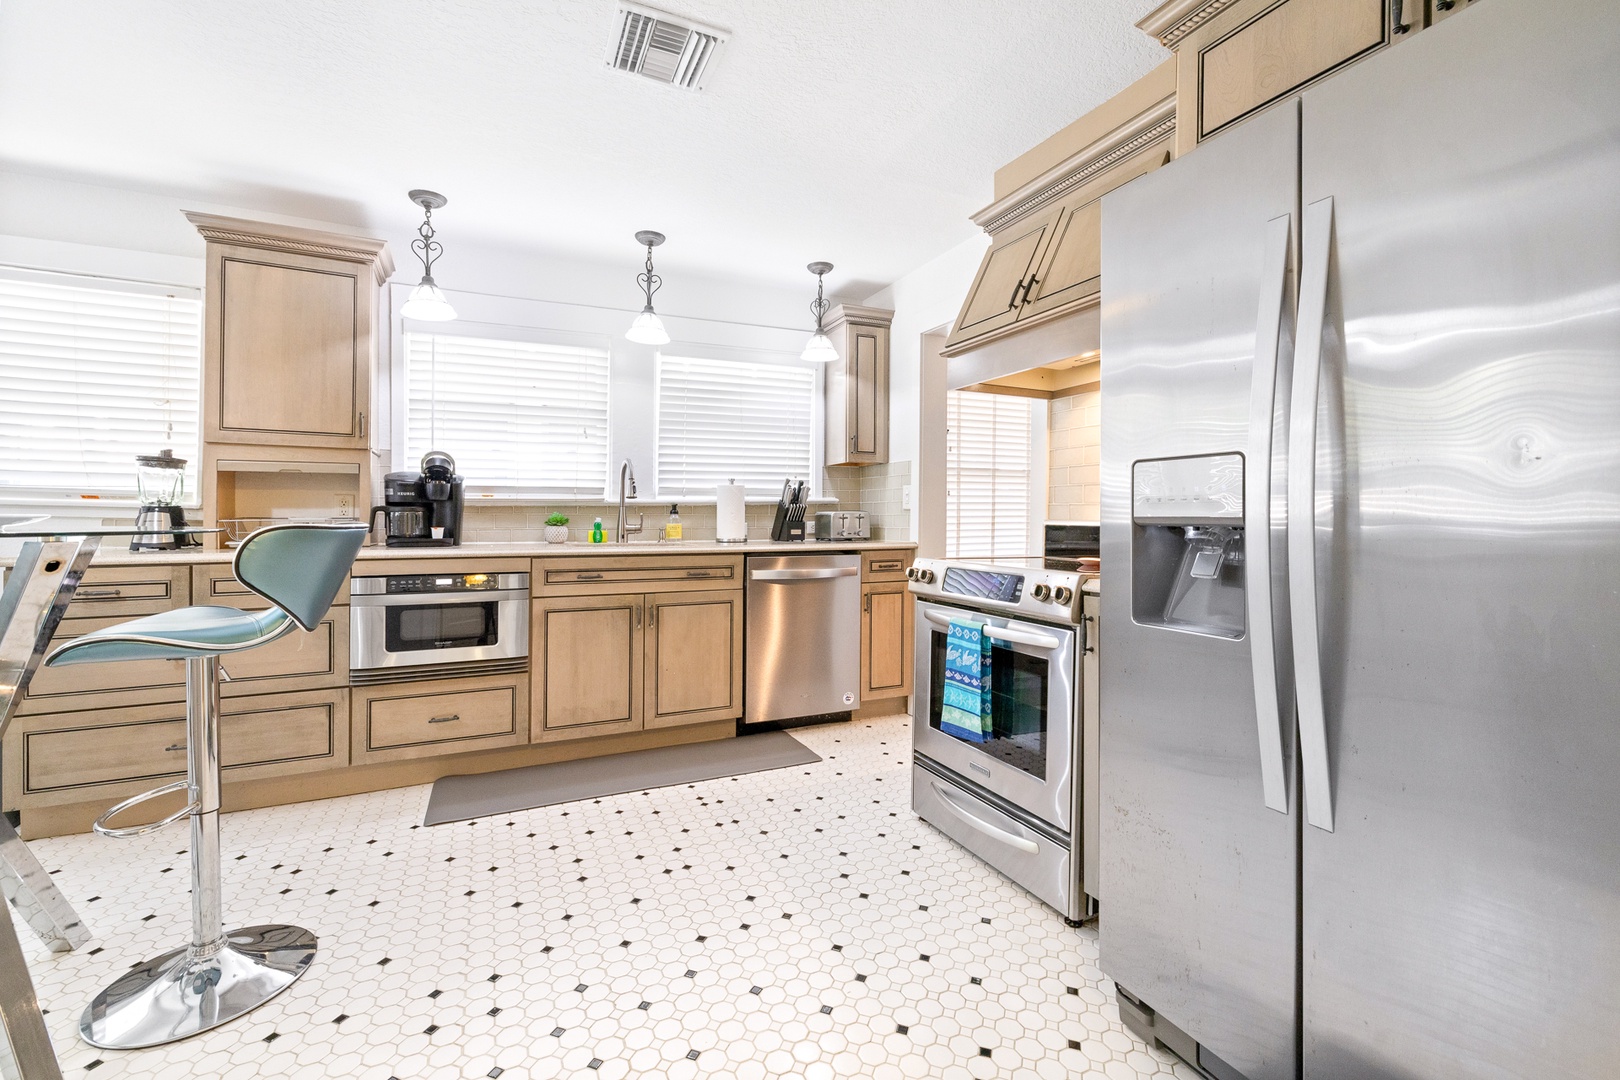 The breezy kitchen offers ample storage space & all the comforts of home